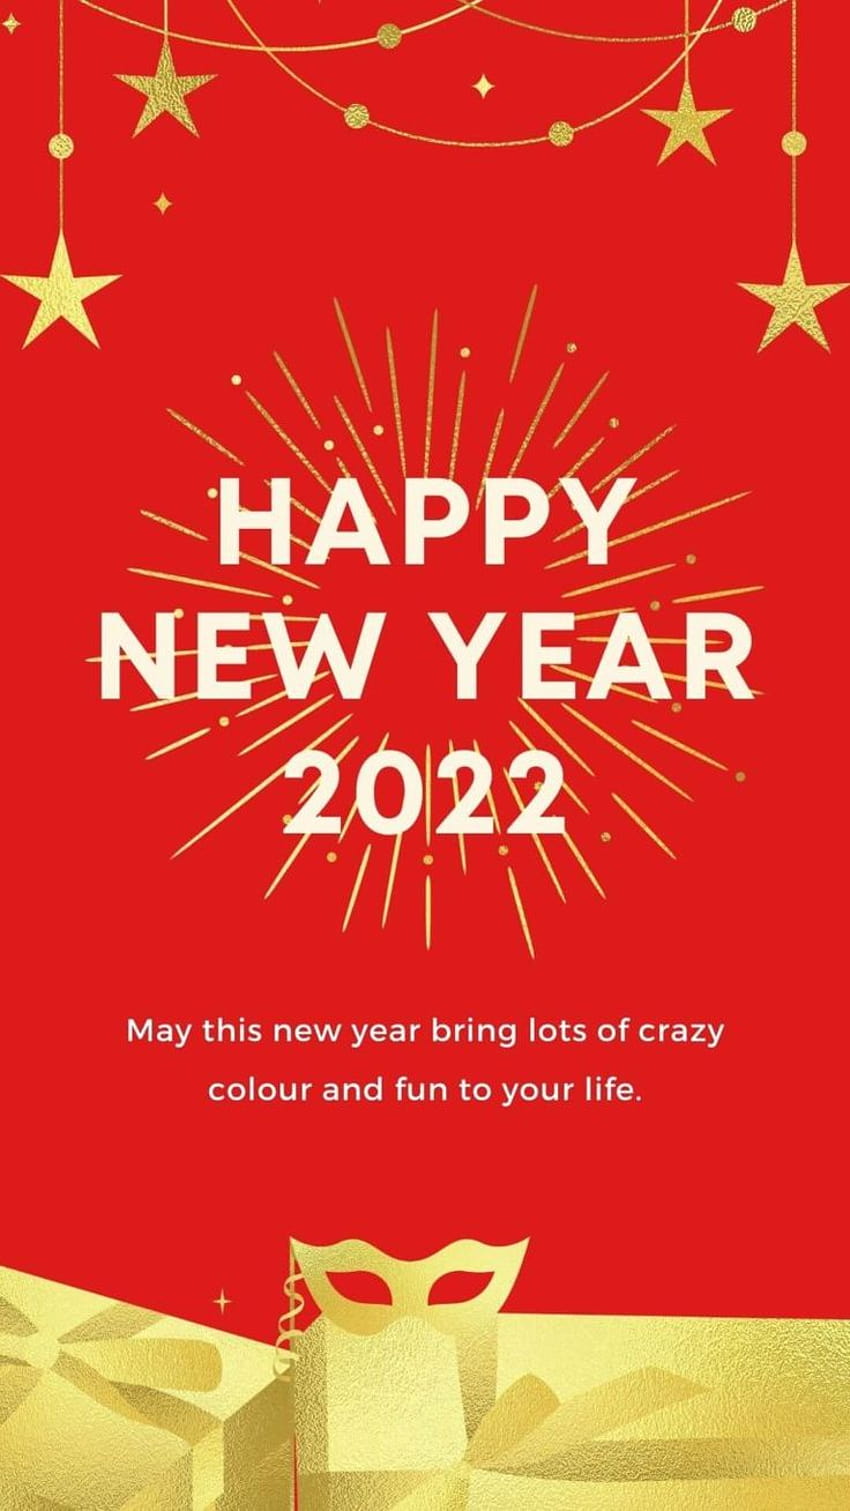 Happy New Year 2023 Wallpapers  Top Free Happy New Year 2023 Backgrounds   WallpaperAccess